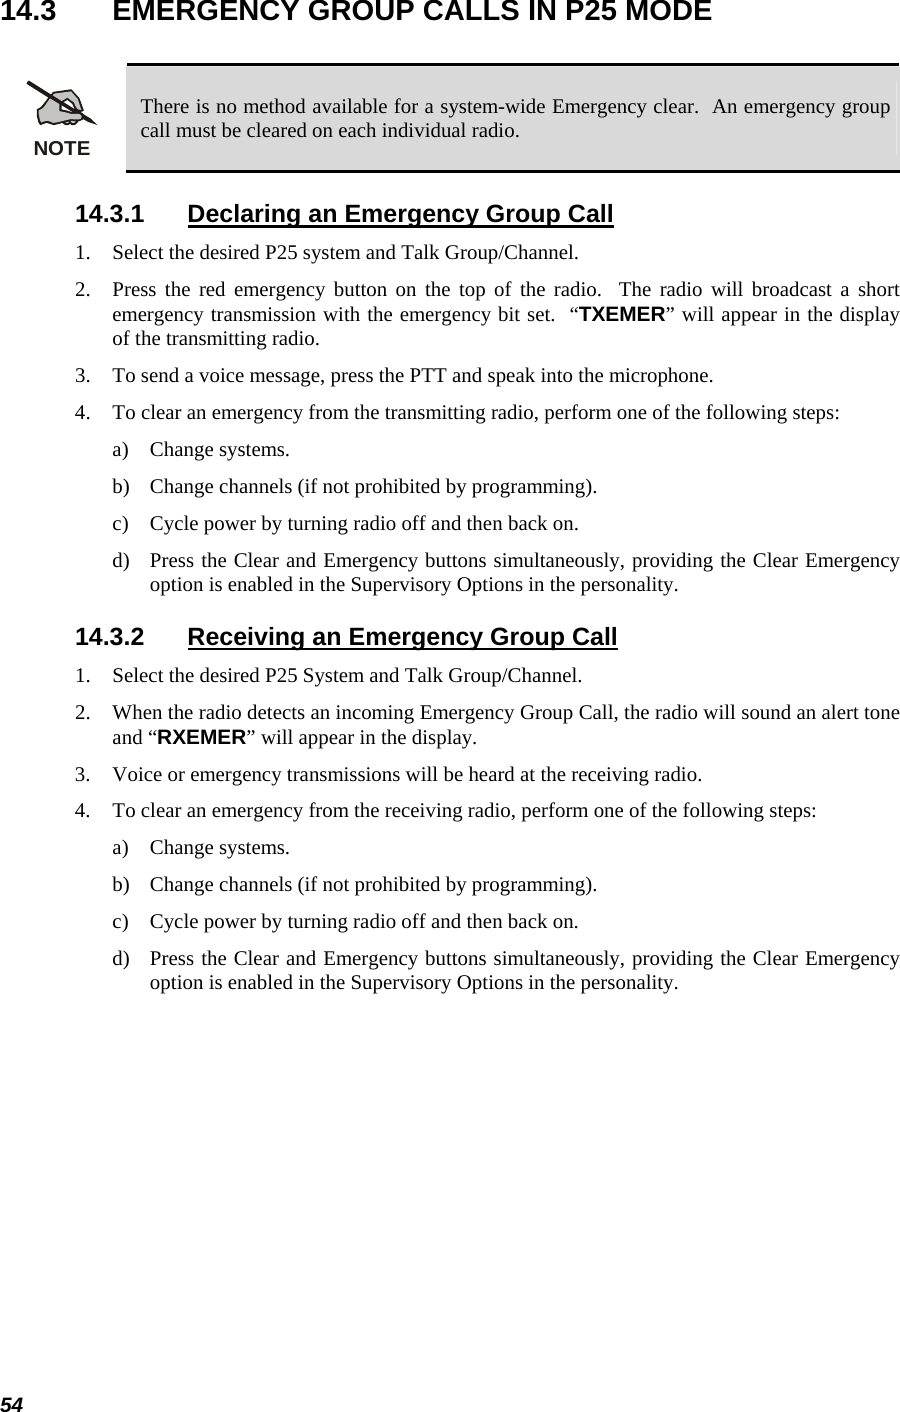  54 14.3  EMERGENCY GROUP CALLS IN P25 MODE  NOTE There is no method available for a system-wide Emergency clear.  An emergency group call must be cleared on each individual radio. 14.3.1  Declaring an Emergency Group Call 1. Select the desired P25 system and Talk Group/Channel. 2. Press the red emergency button on the top of the radio.  The radio will broadcast a short emergency transmission with the emergency bit set.  “TXEMER” will appear in the display of the transmitting radio. 3. To send a voice message, press the PTT and speak into the microphone. 4. To clear an emergency from the transmitting radio, perform one of the following steps: a) Change systems. b) Change channels (if not prohibited by programming). c) Cycle power by turning radio off and then back on. d) Press the Clear and Emergency buttons simultaneously, providing the Clear Emergency option is enabled in the Supervisory Options in the personality. 14.3.2  Receiving an Emergency Group Call 1. Select the desired P25 System and Talk Group/Channel. 2. When the radio detects an incoming Emergency Group Call, the radio will sound an alert tone and “RXEMER” will appear in the display. 3. Voice or emergency transmissions will be heard at the receiving radio. 4. To clear an emergency from the receiving radio, perform one of the following steps: a) Change systems. b) Change channels (if not prohibited by programming). c) Cycle power by turning radio off and then back on.  d) Press the Clear and Emergency buttons simultaneously, providing the Clear Emergency option is enabled in the Supervisory Options in the personality. 